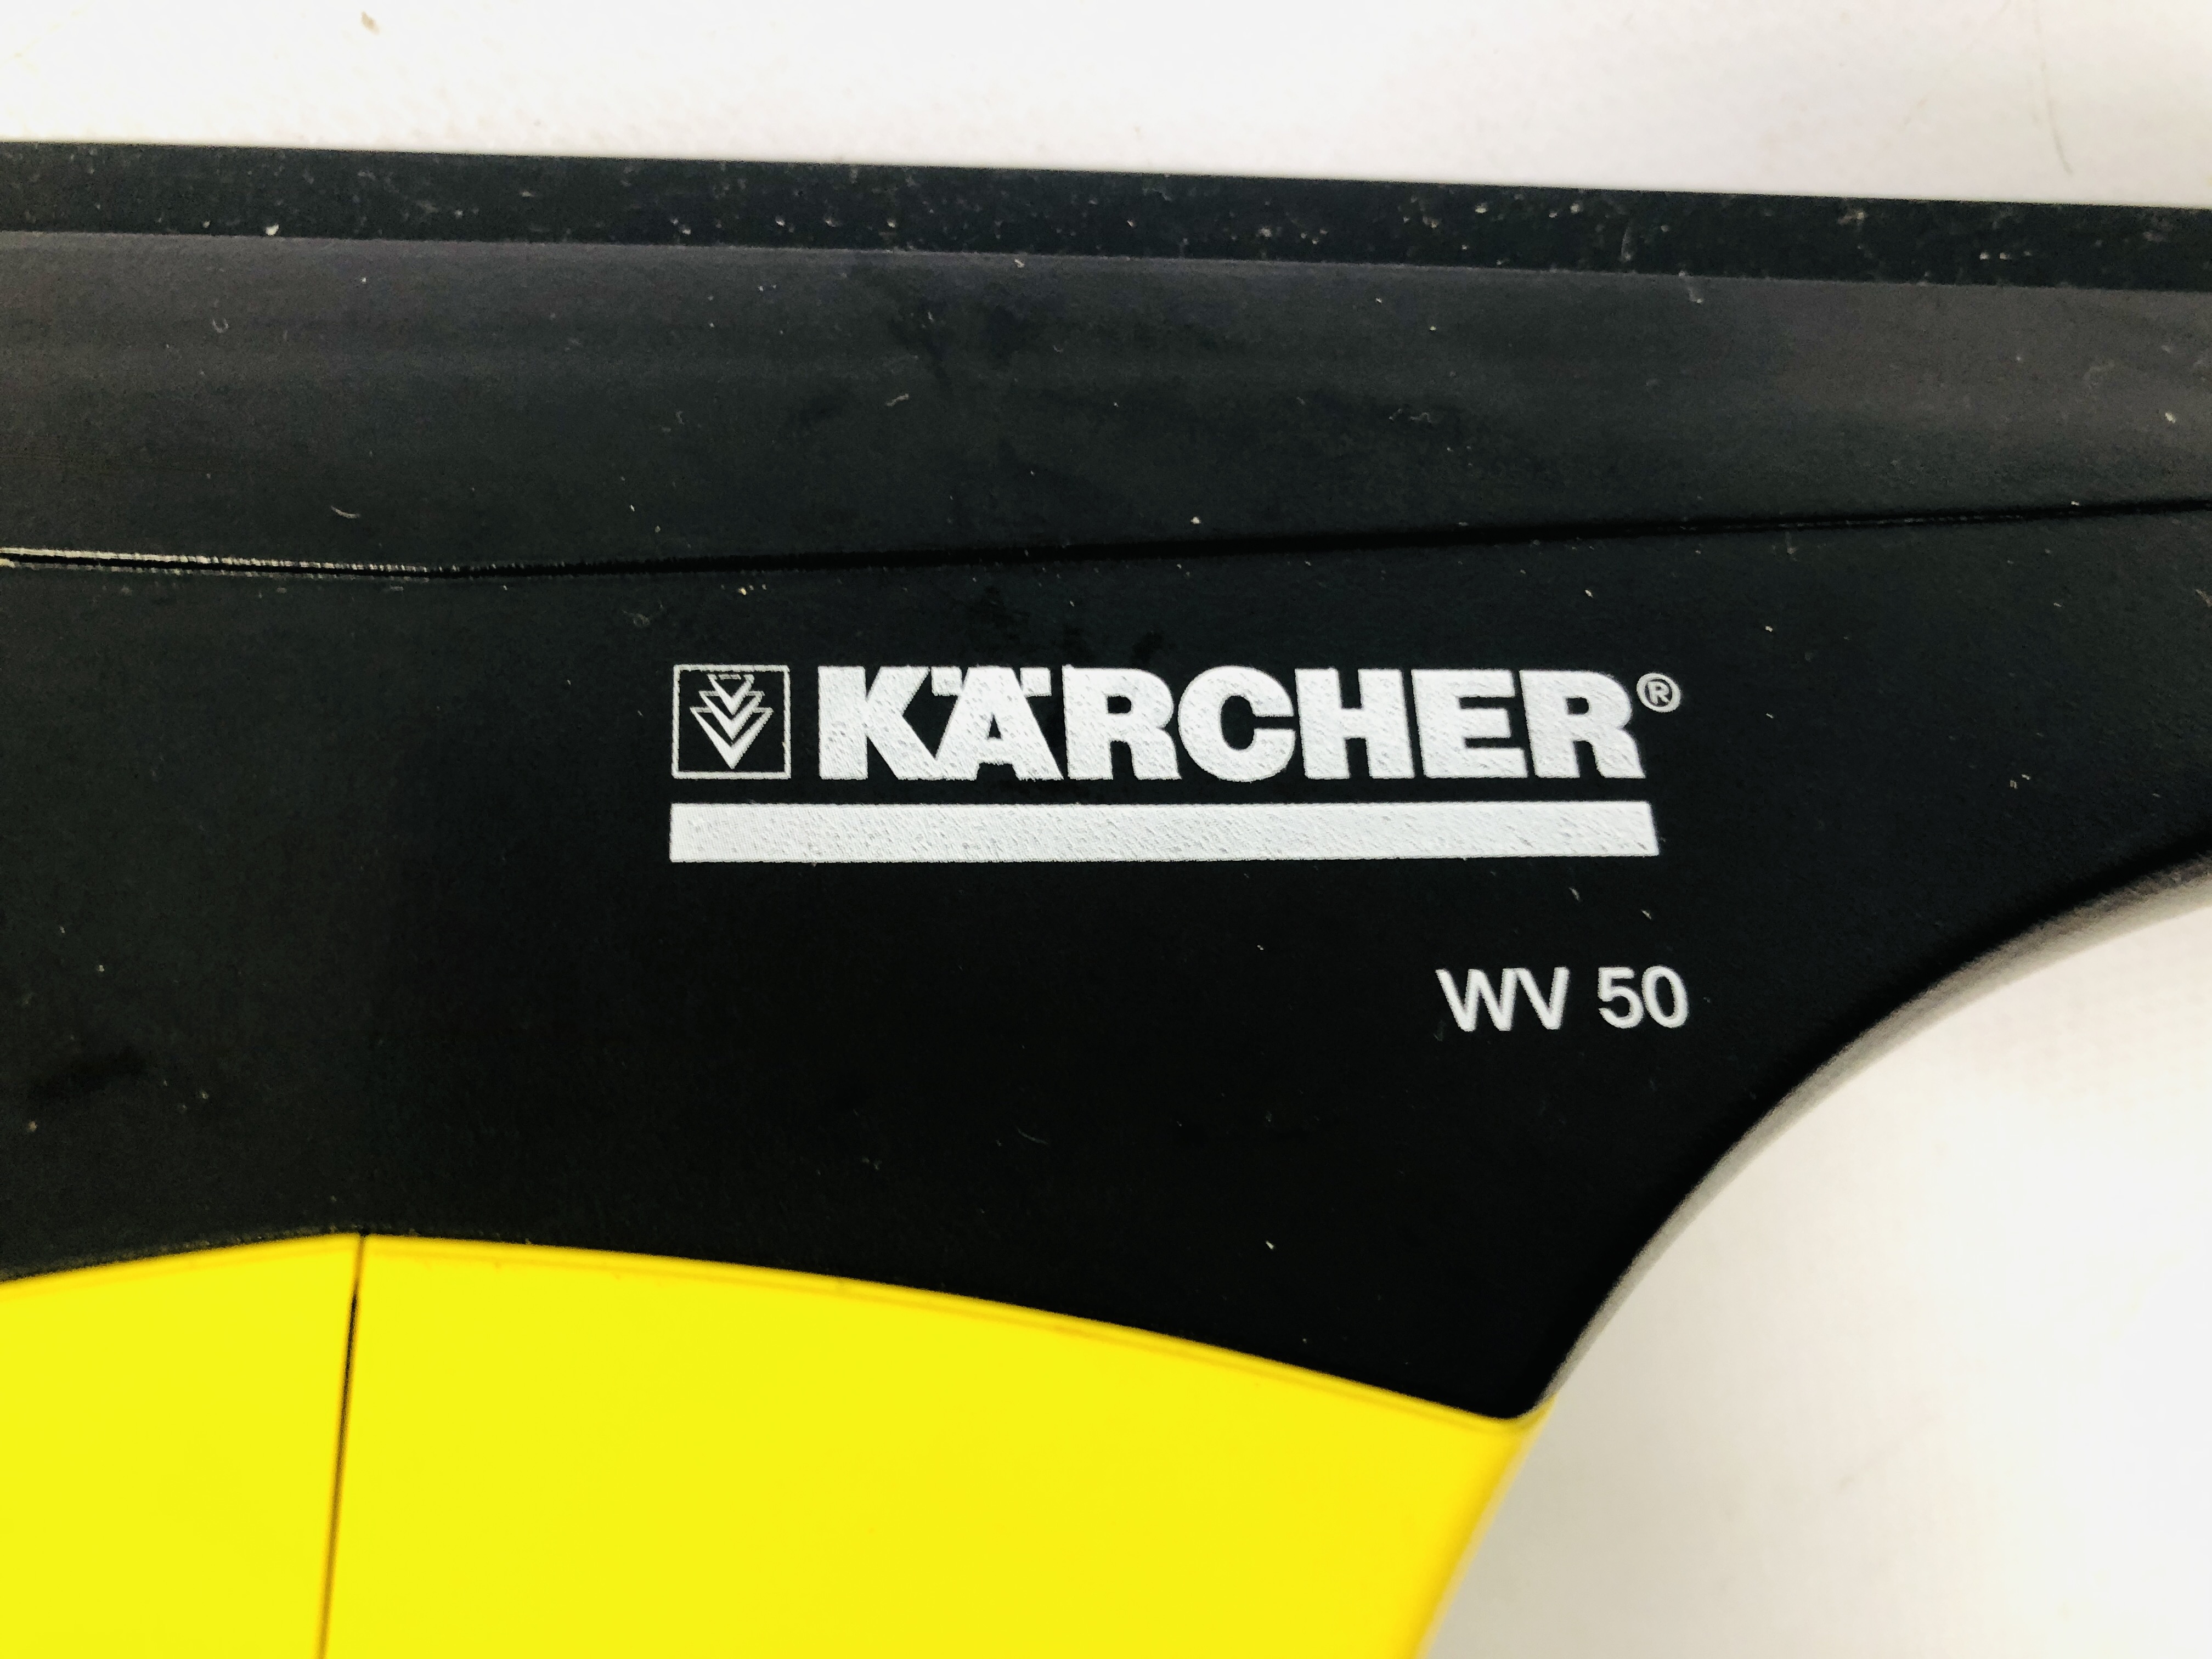 K'ARCHER WV50 WINDOW CLEANER IN BOX WITH CHARGER - SOLD AS SEEN - Image 4 of 4